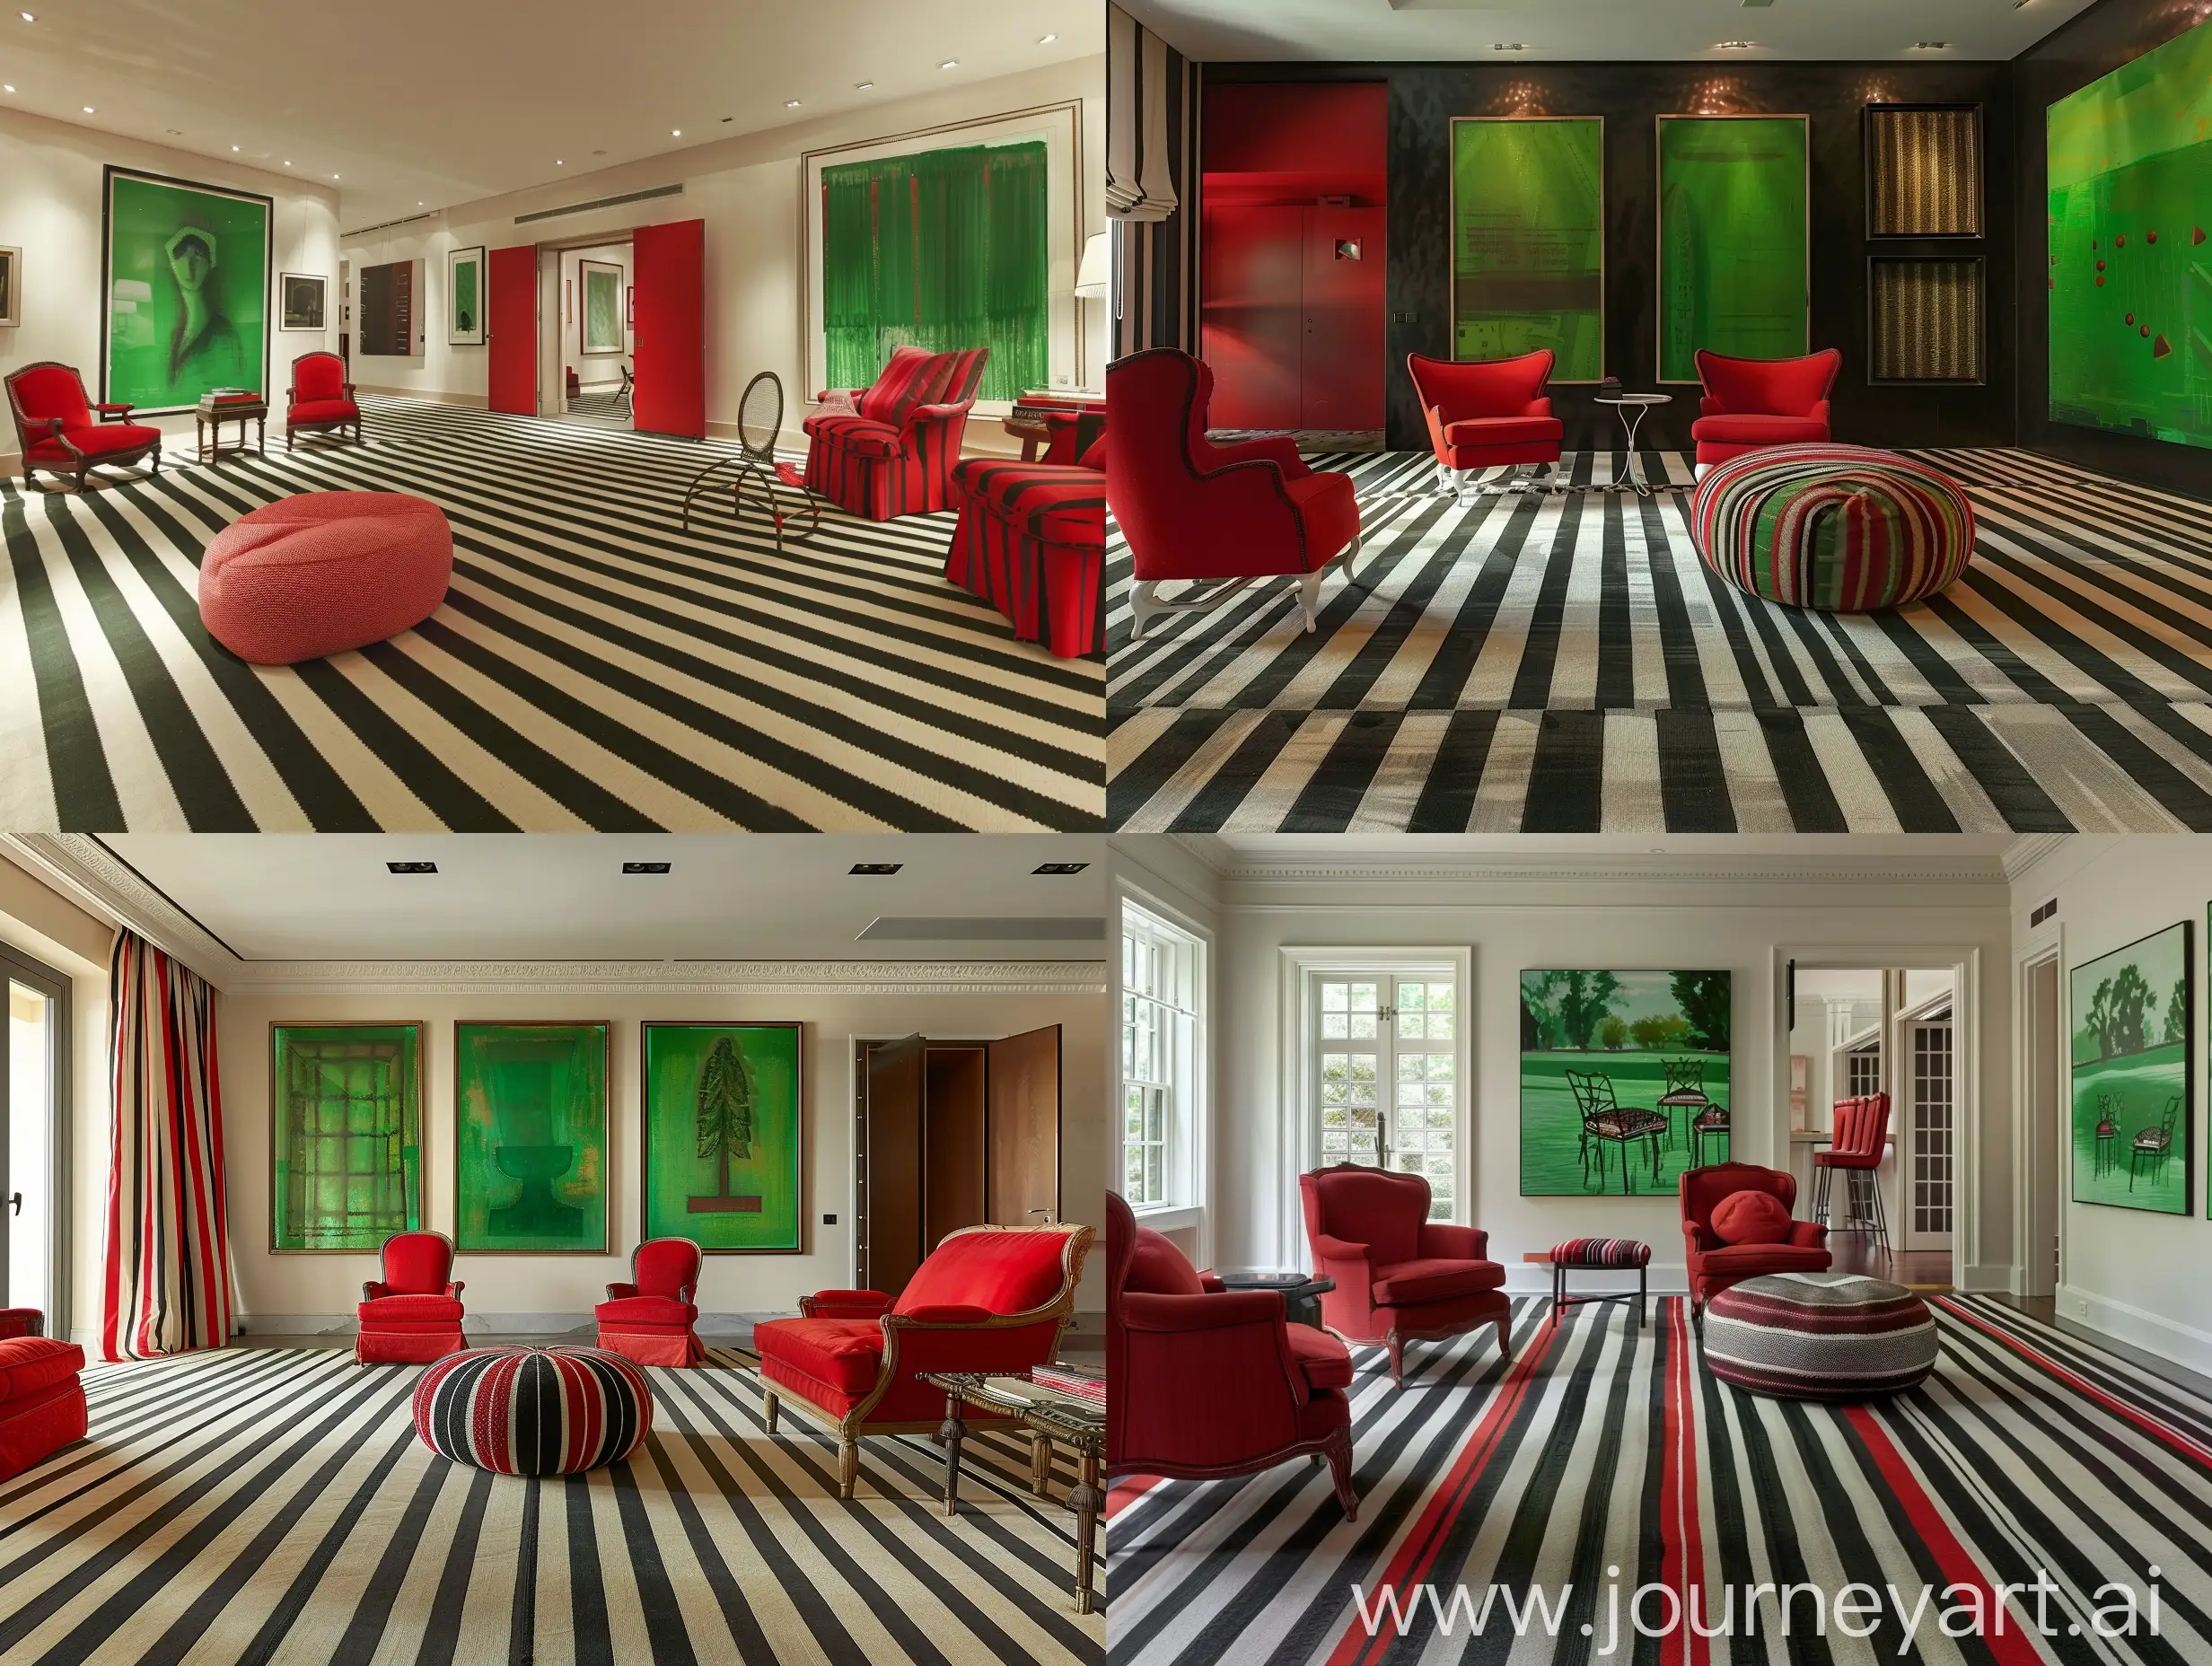 Spacious-Living-Room-Interior-with-Red-Chairs-and-Green-Paintings